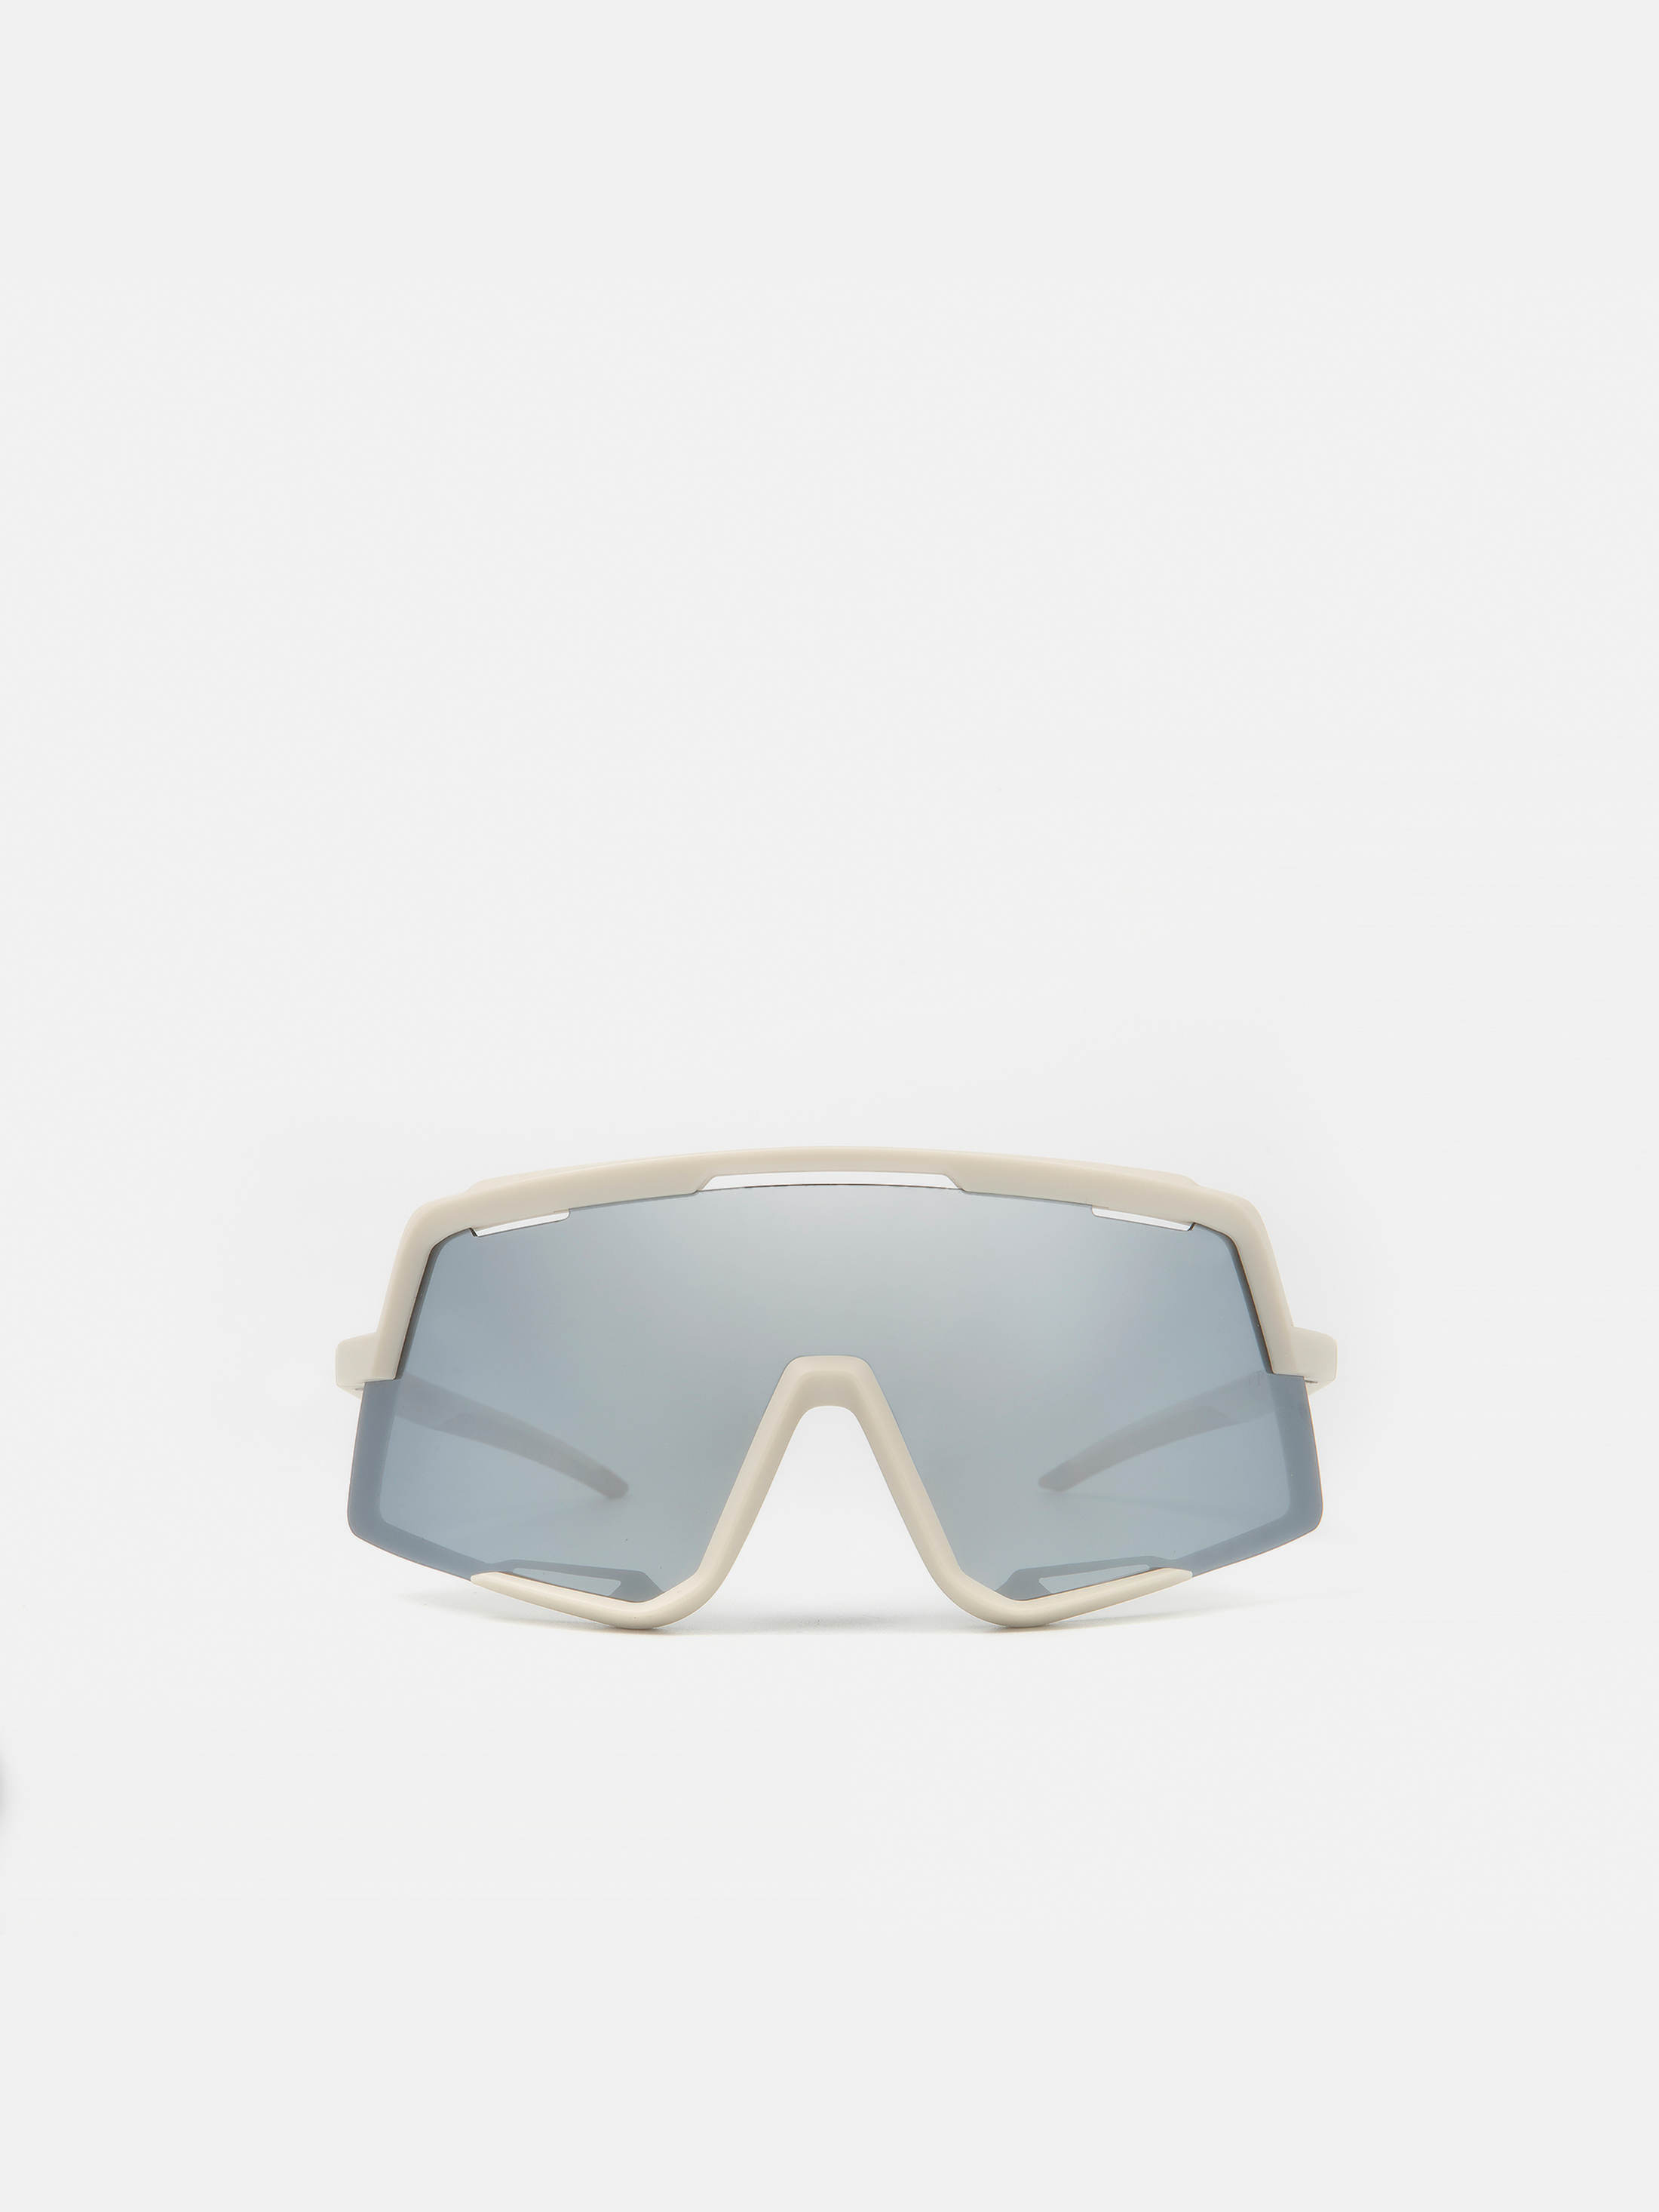 MÓ BAUER Sunglasses in Ivory/Sand